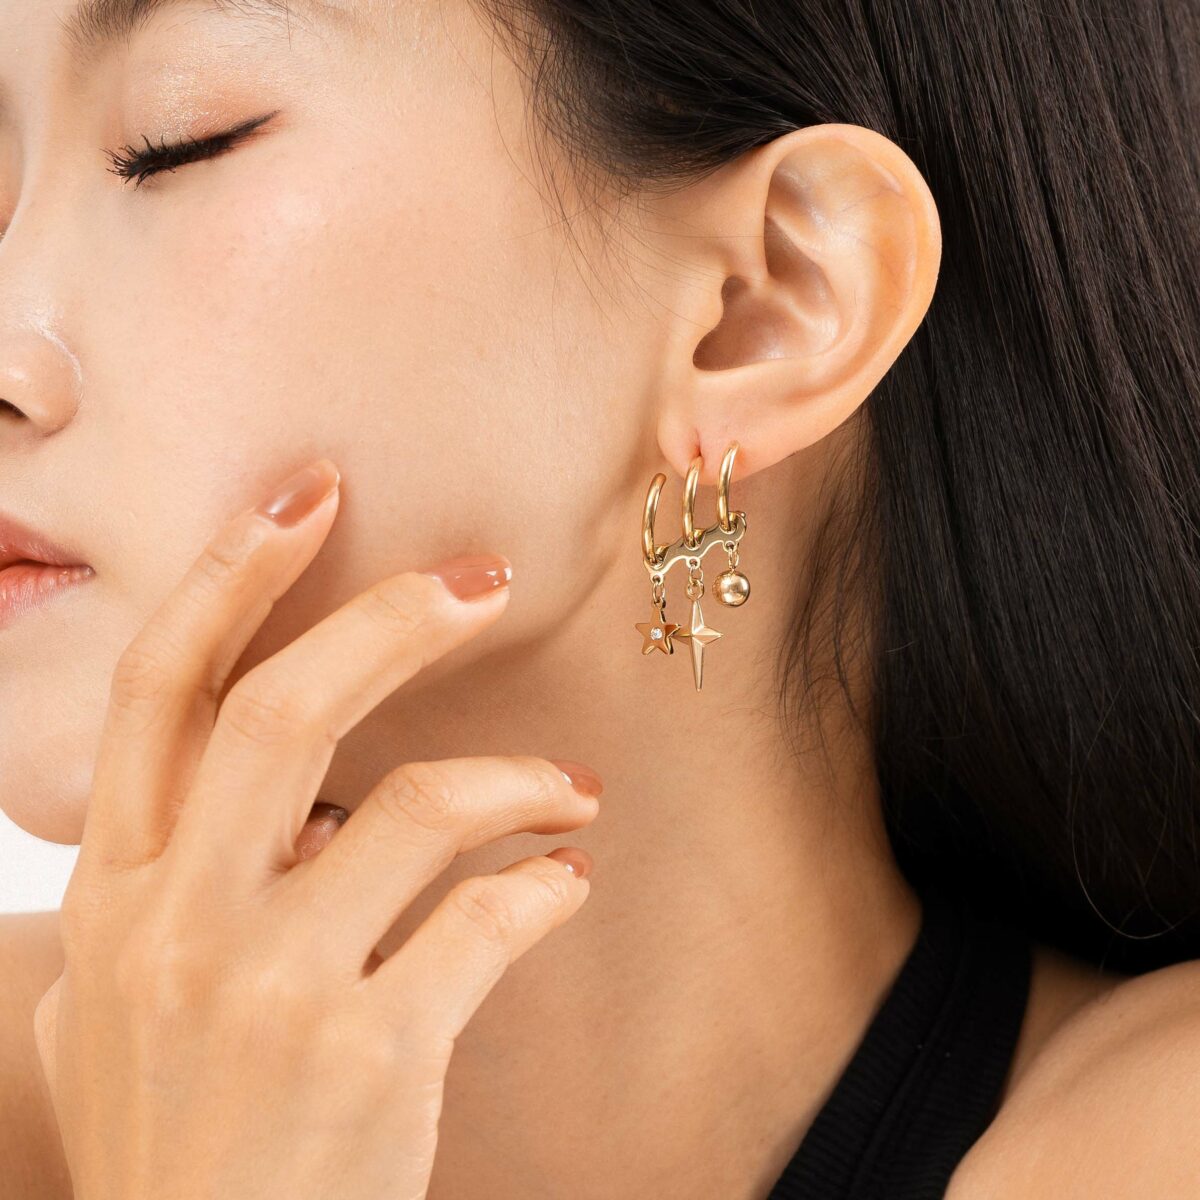 https://m.clubbella.co/product/radial-18k-gold-plated-ear-crawler-earrings/ RADIAL CRAWLER EARRINGS (2)